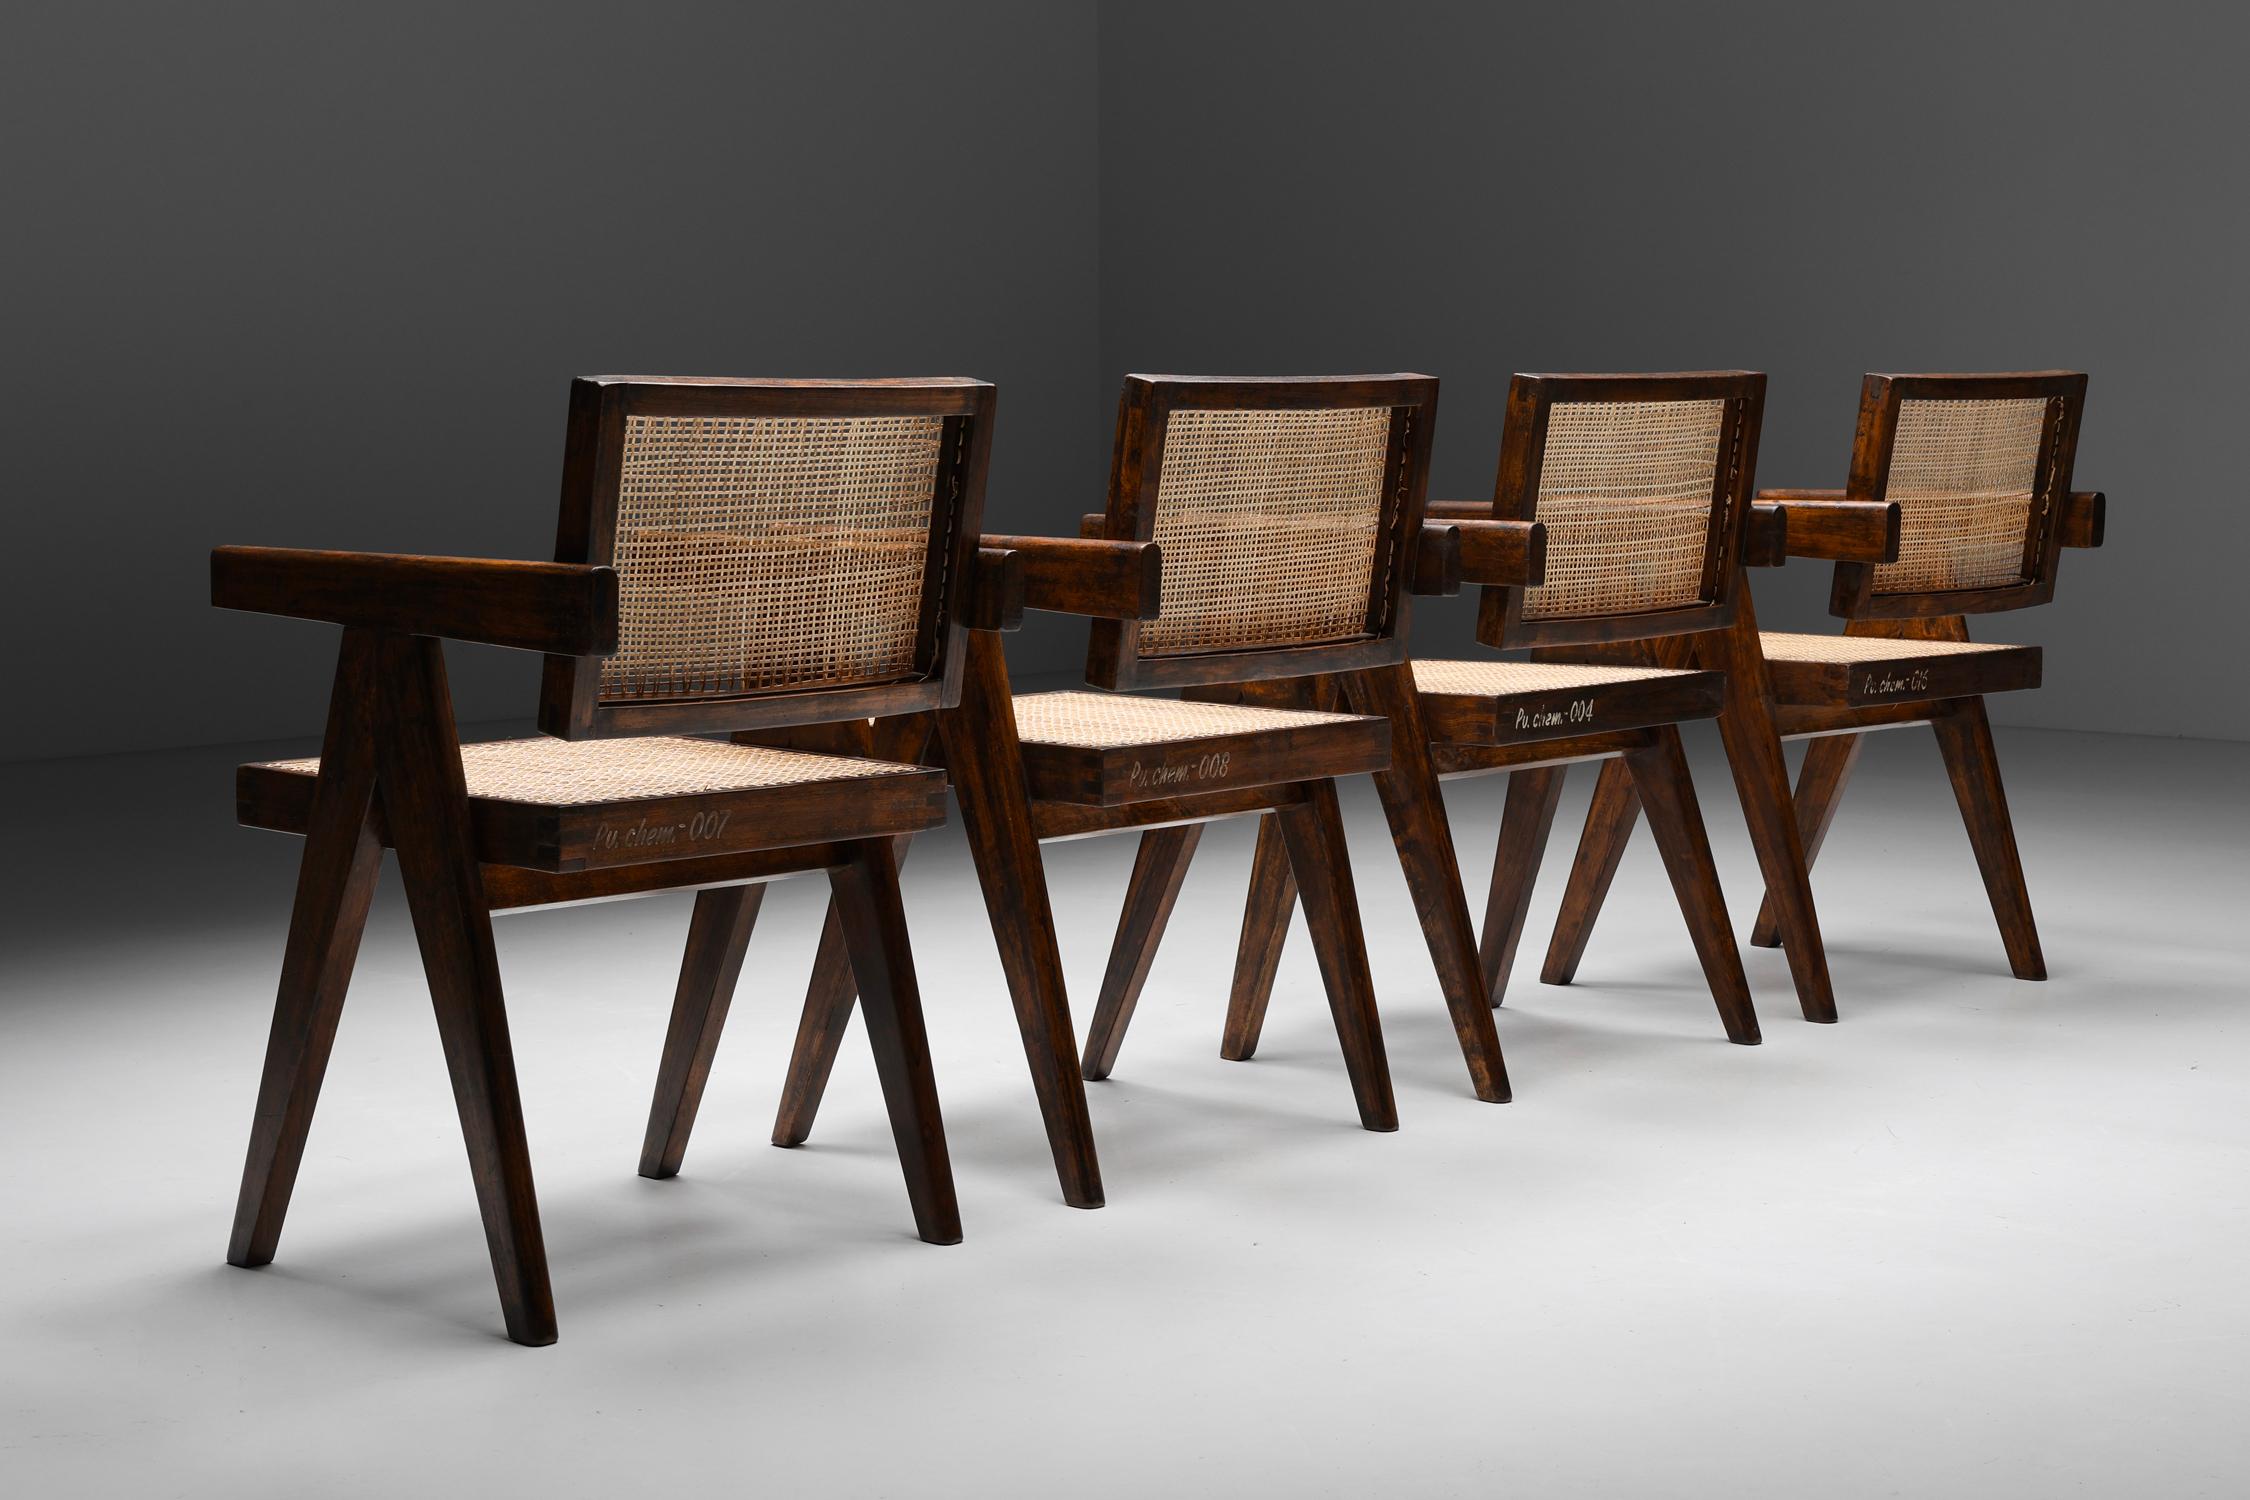 Mid-Century Modern Office Cane Chairs by Pierre Jeanneret, PJ-SI-28-A, Rosewood, Chandigarh, 1955